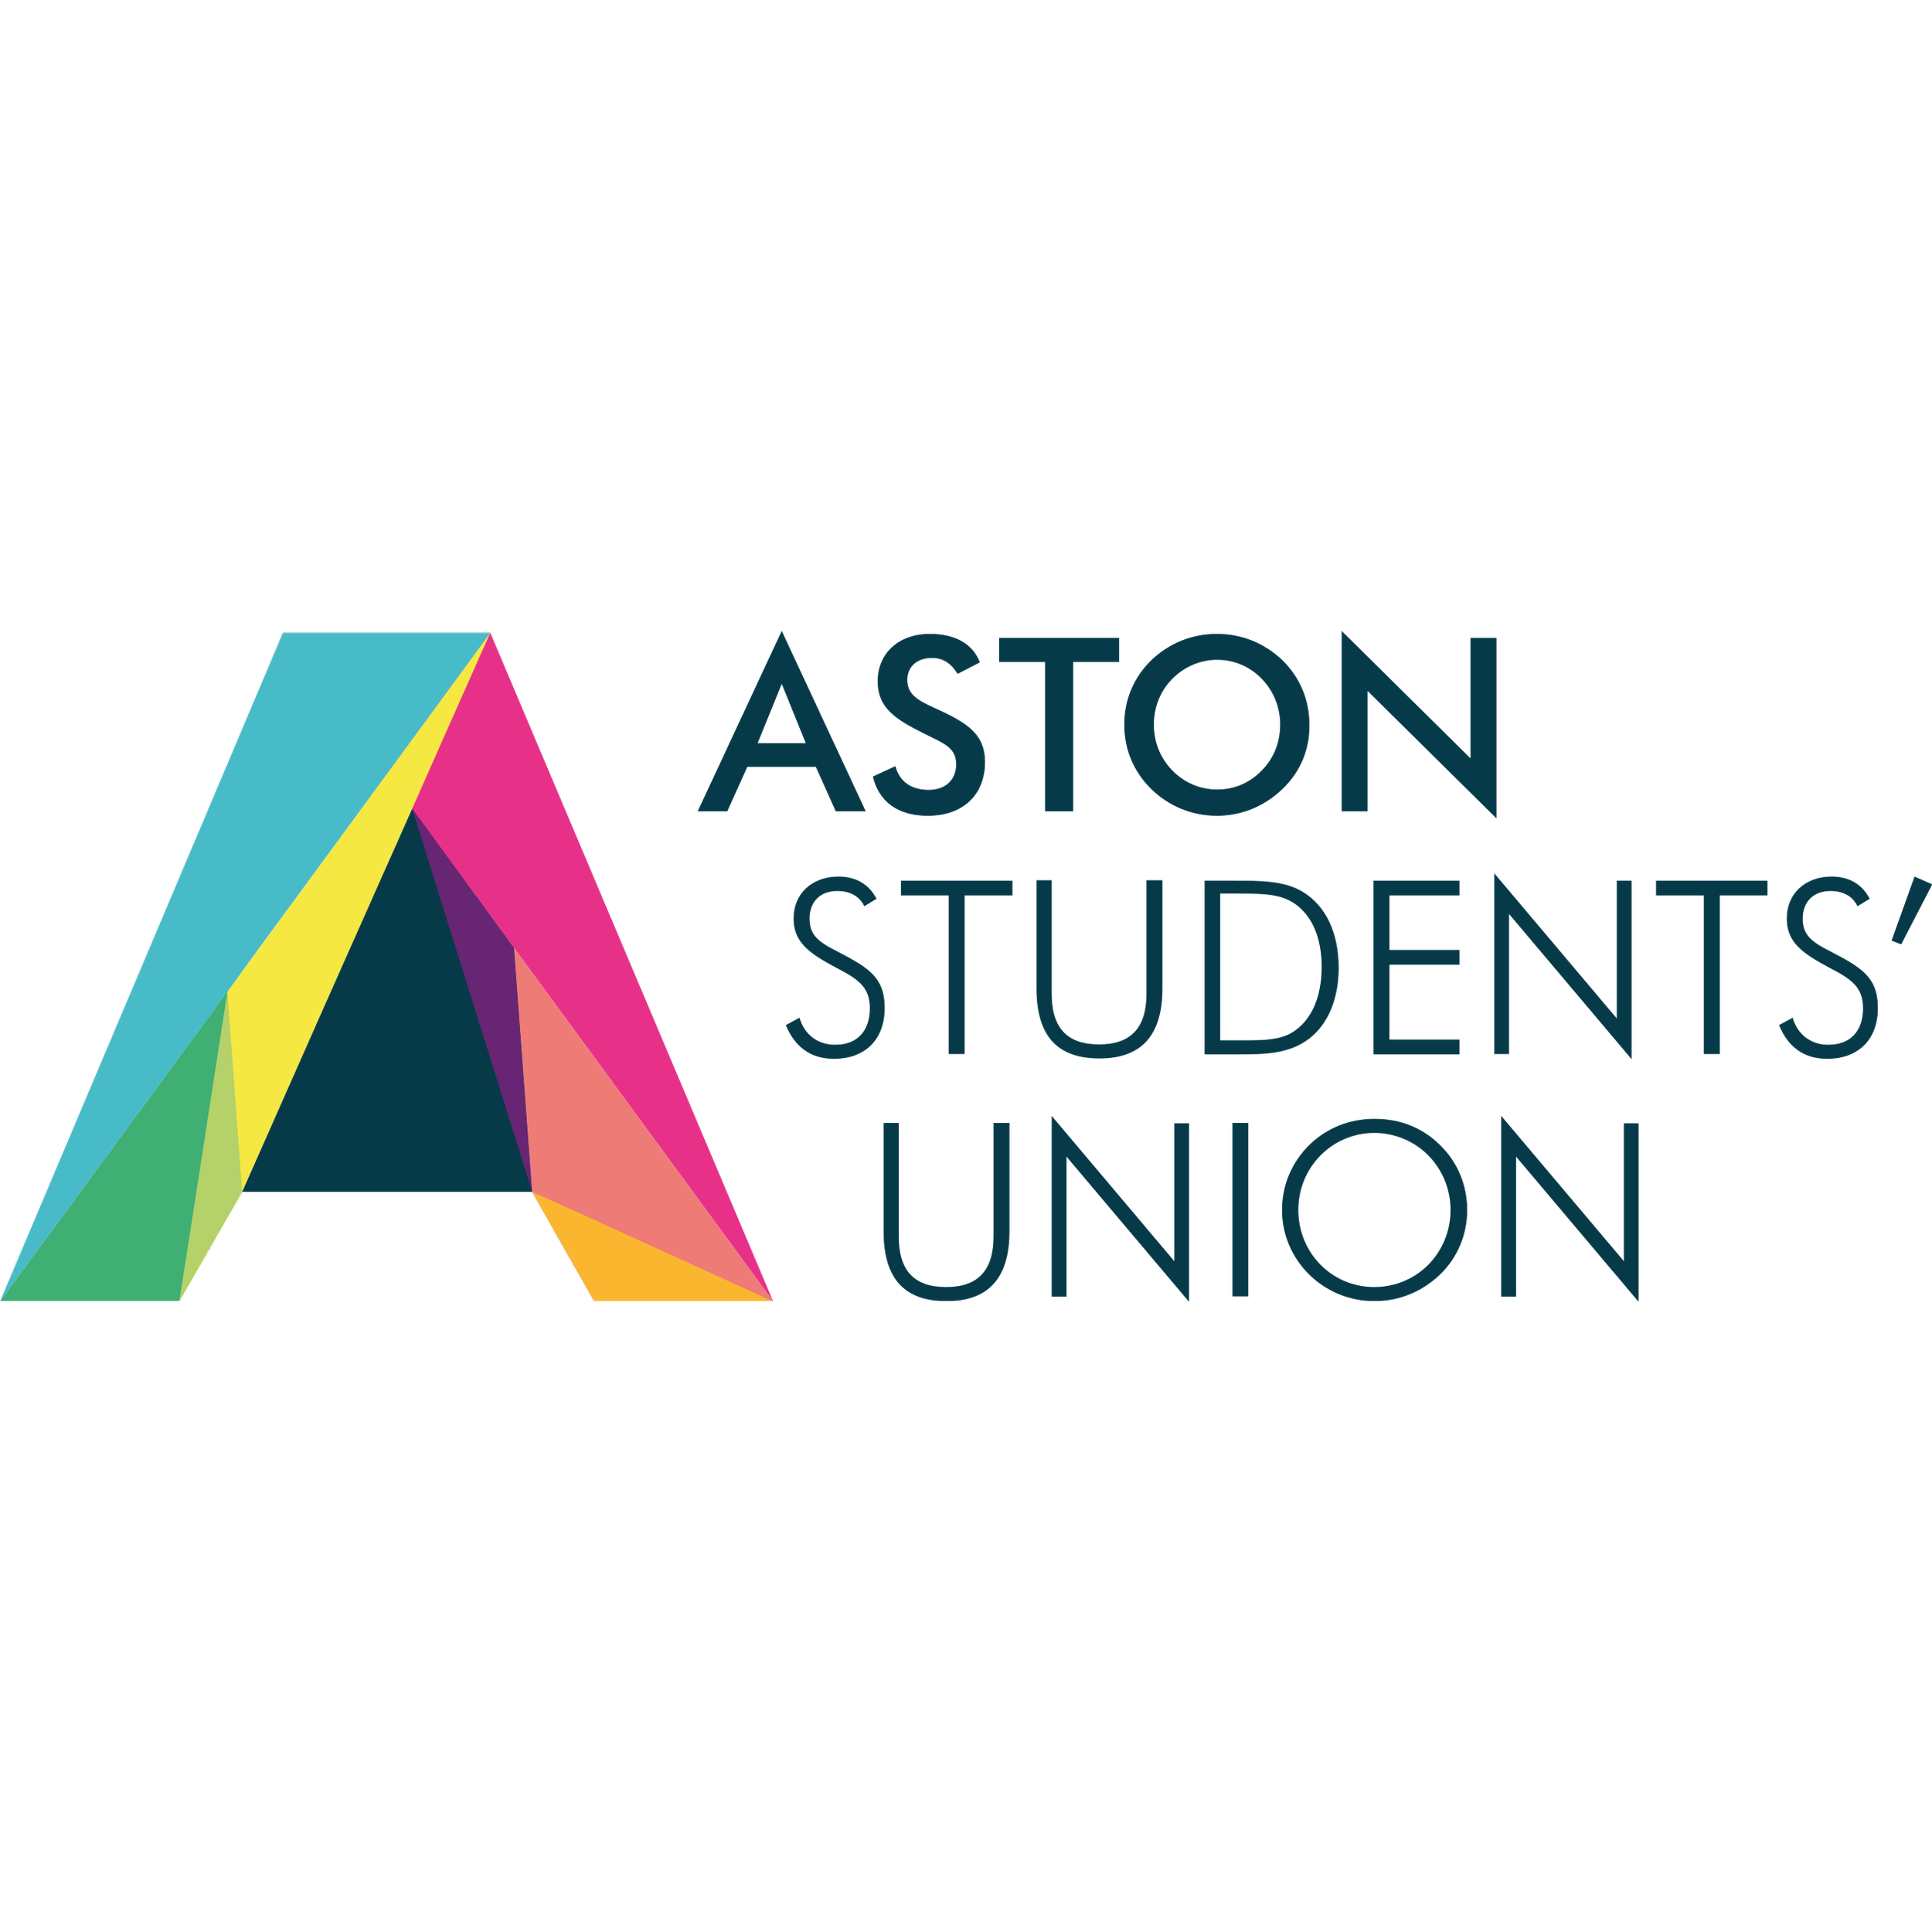 1-AST186_Students_Union_Rebrand_Logo.svg.png